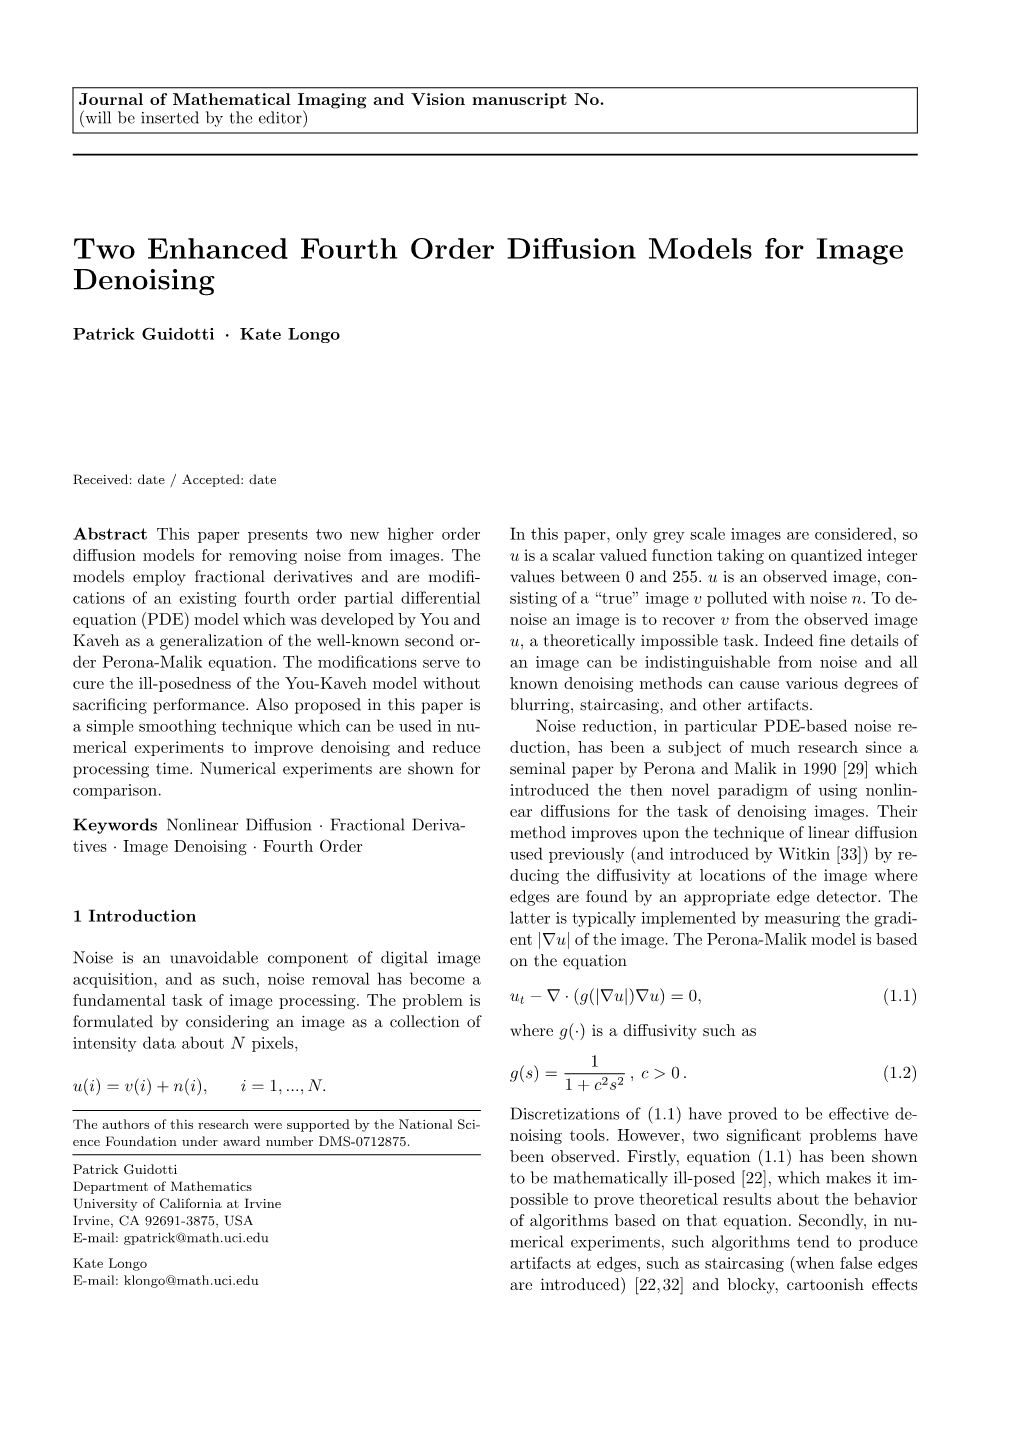 Two Enhanced Fourth Order Diffusion Models for Image Denoising